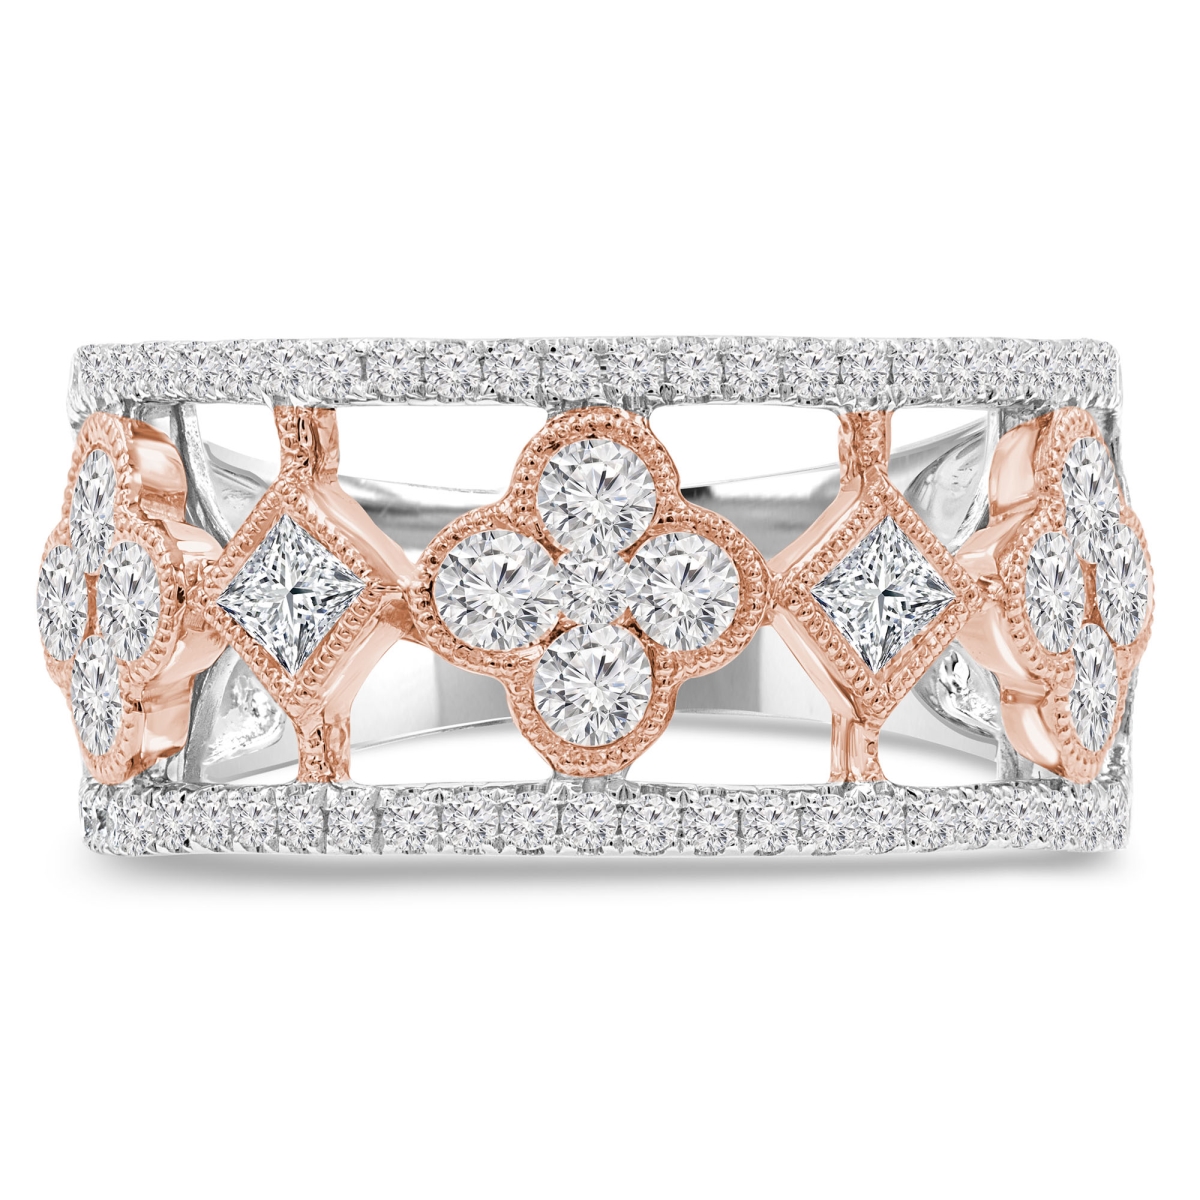 Picture of Majesty Diamonds MDR210138-8.5 1.13 CTW Princess Diamond Cocktail Ring in 14K Two-Tone Gold - Size 8.5